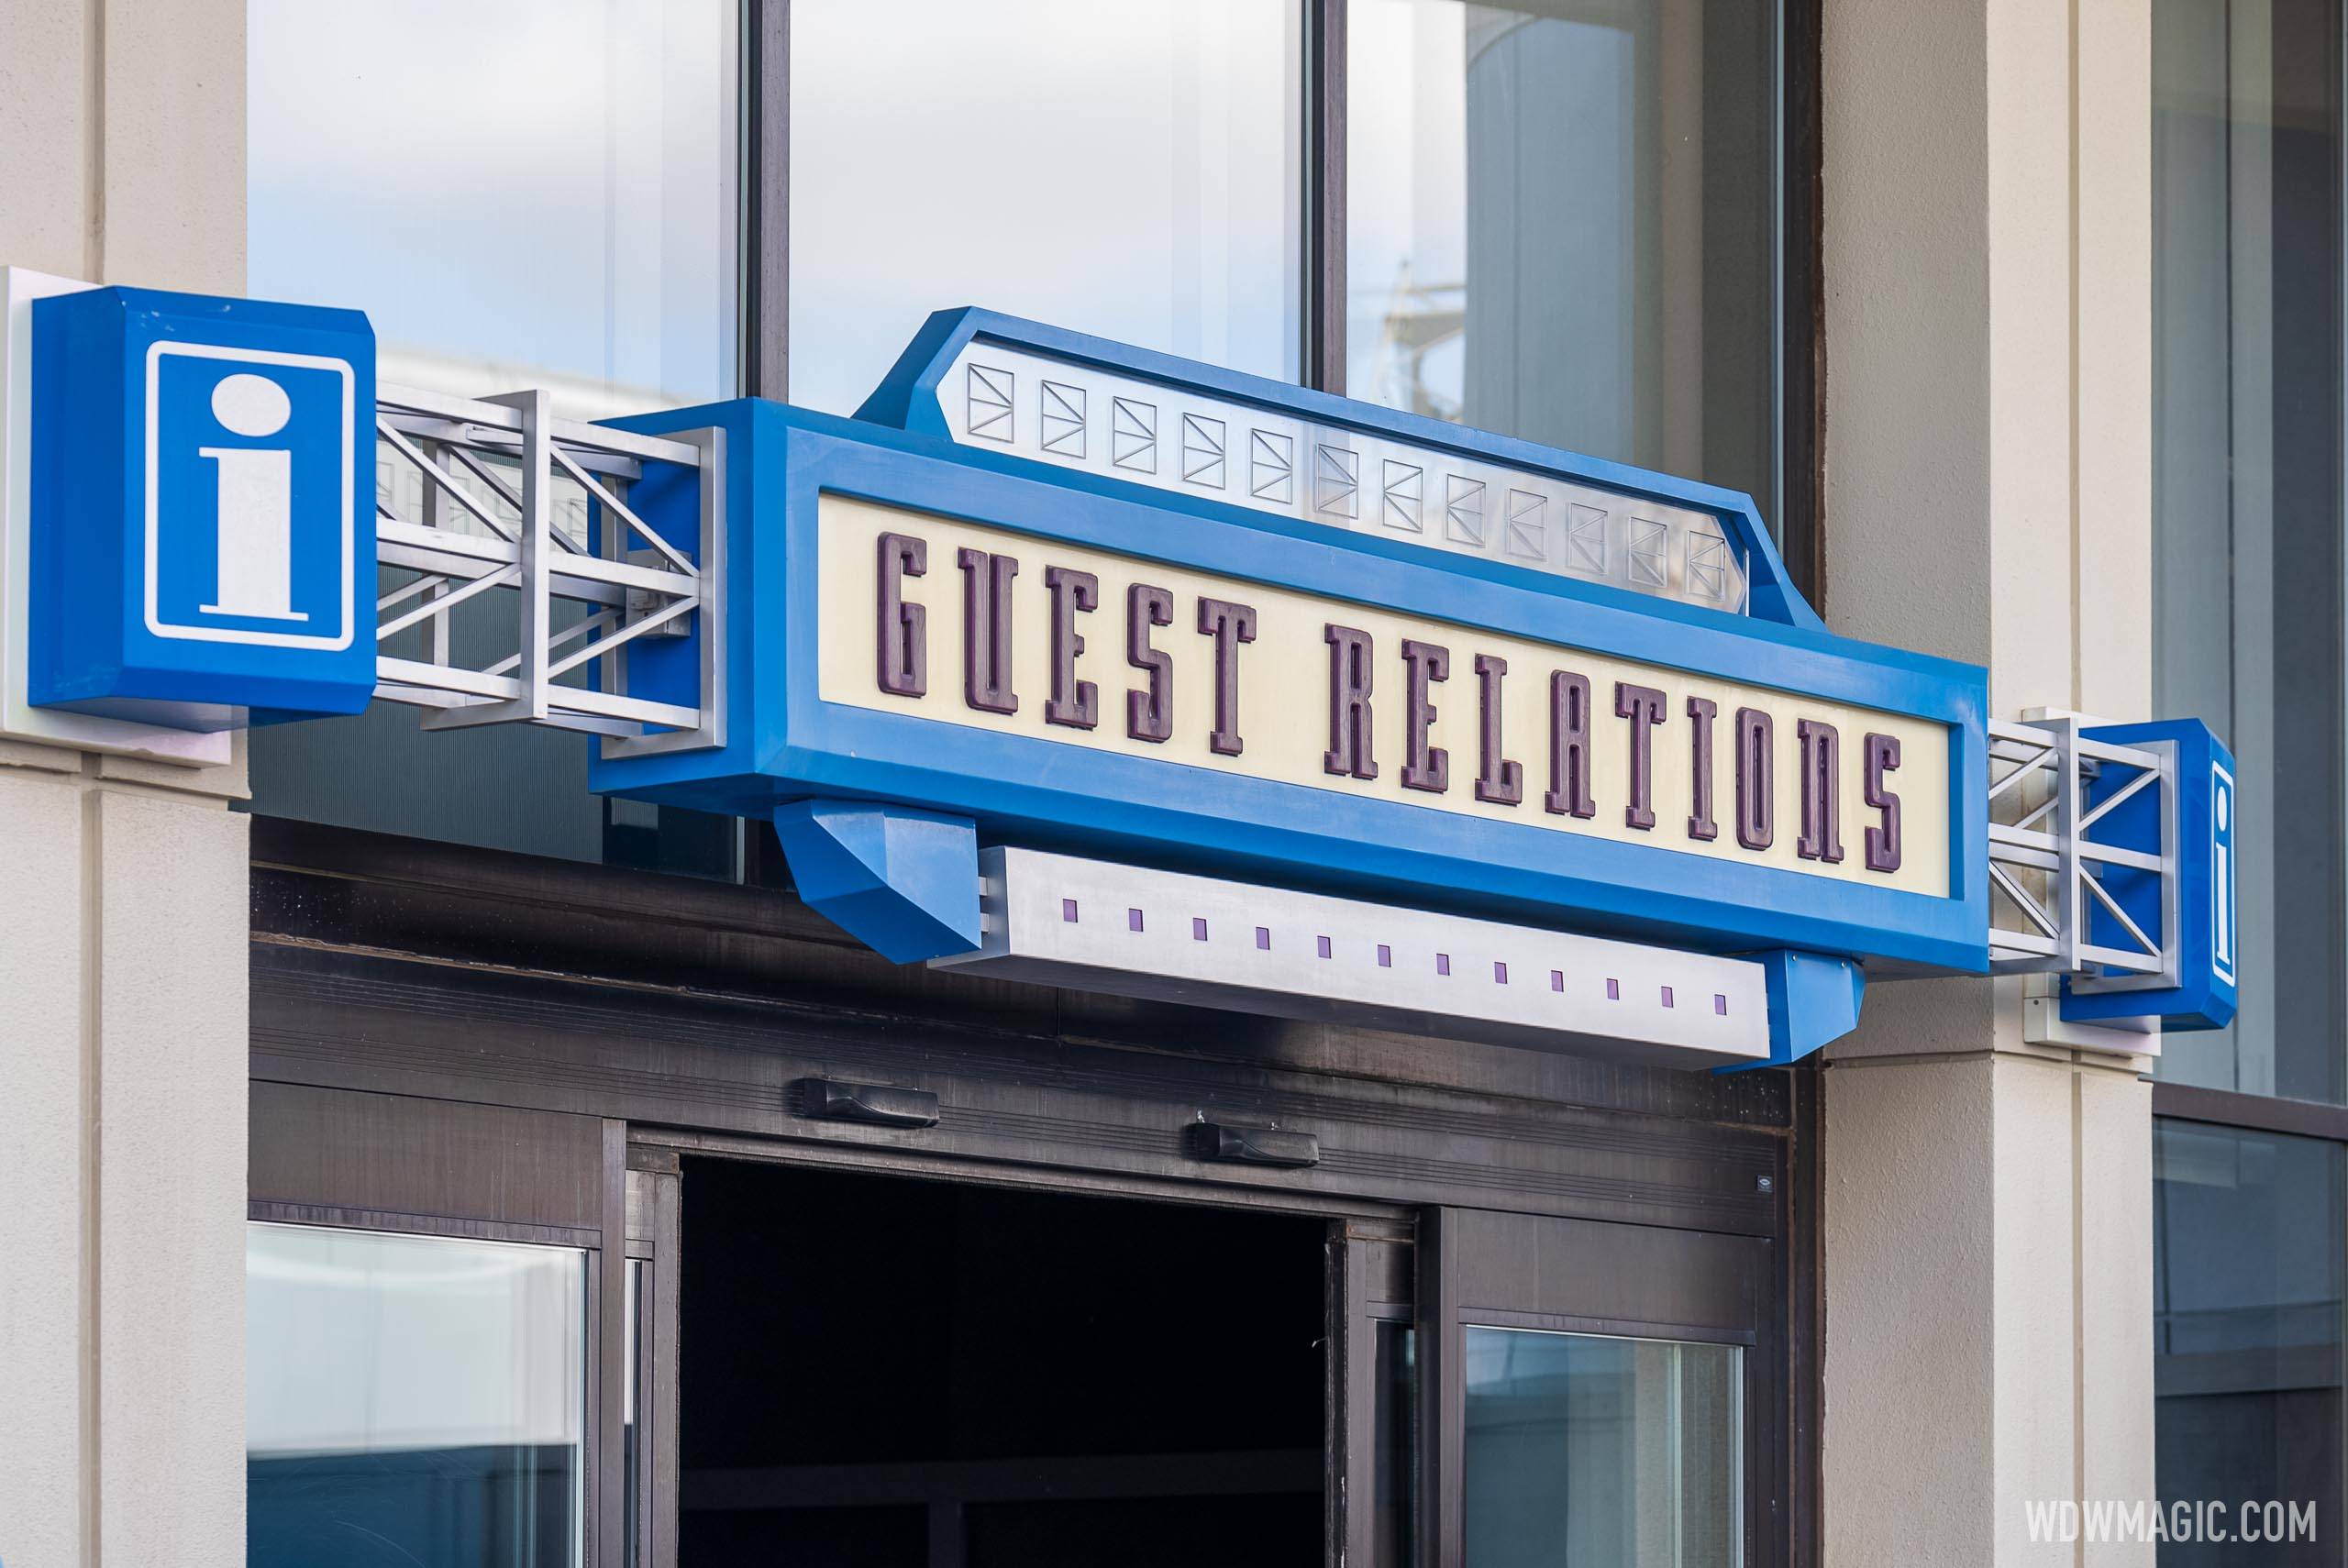 This old sign will likely be gone as part of the updates to Guest Relations